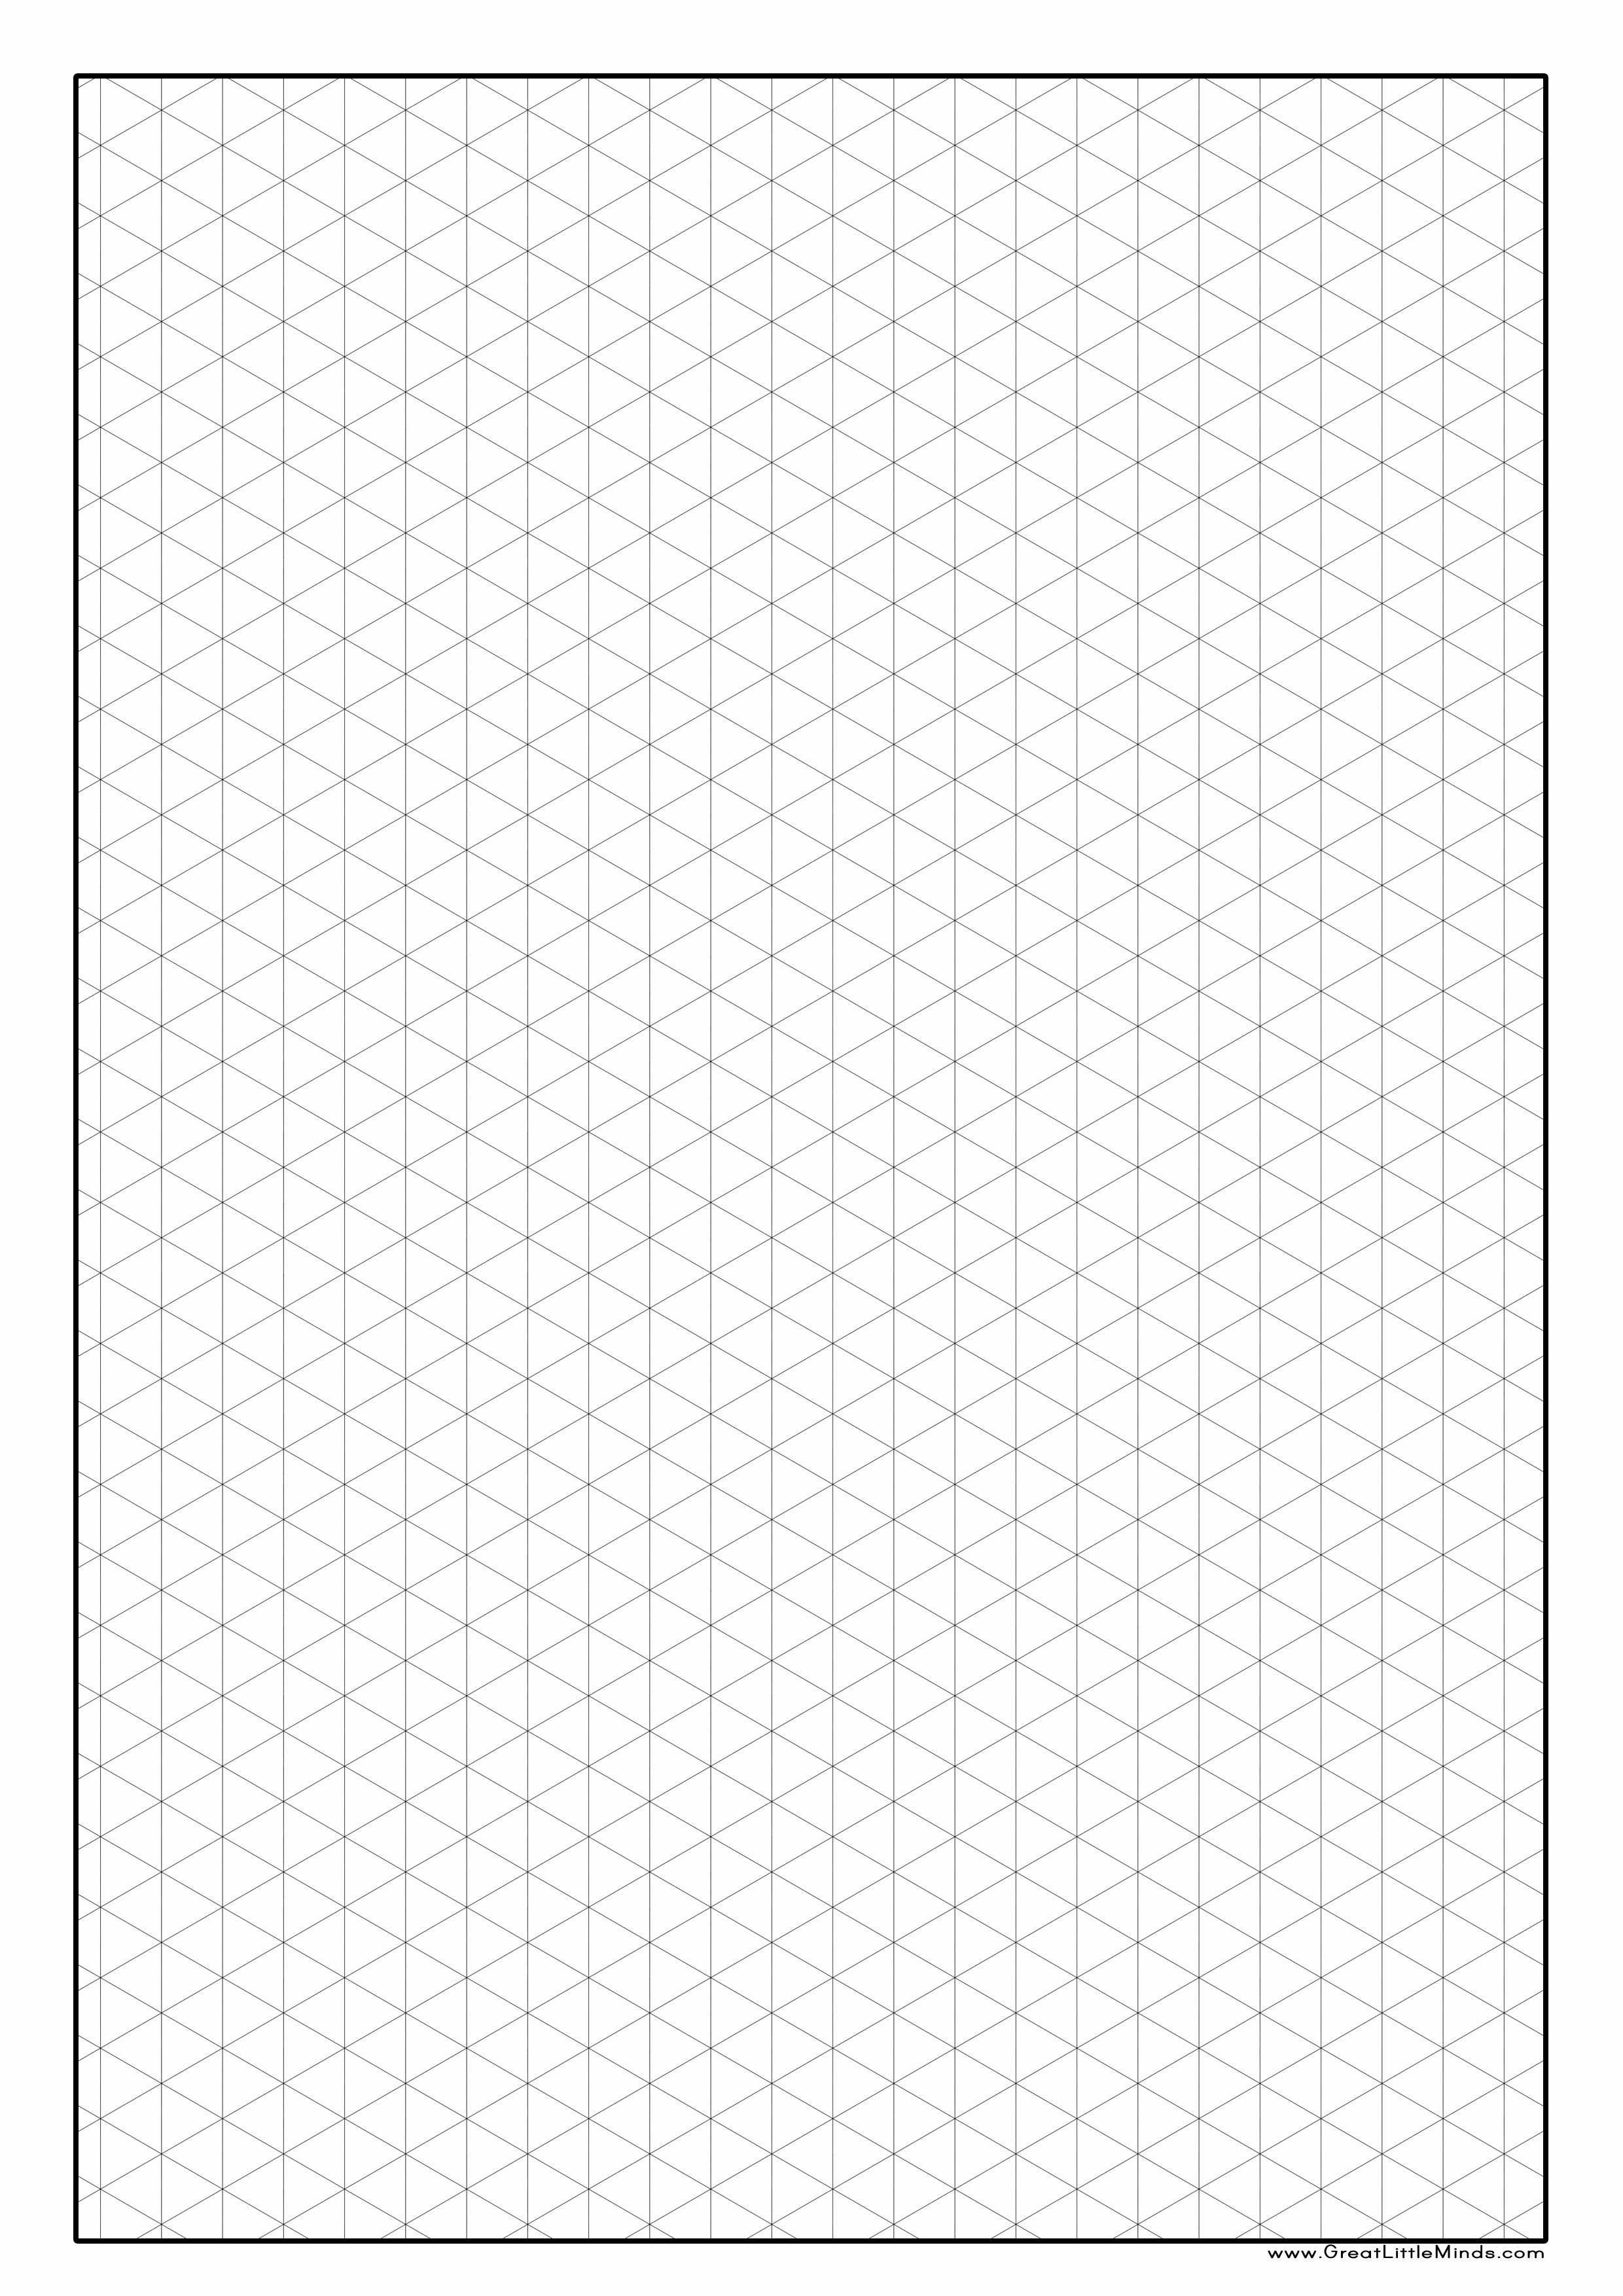 Graph Paper to Print Out Unique Printable isometric Graph Paper Zoey S Room